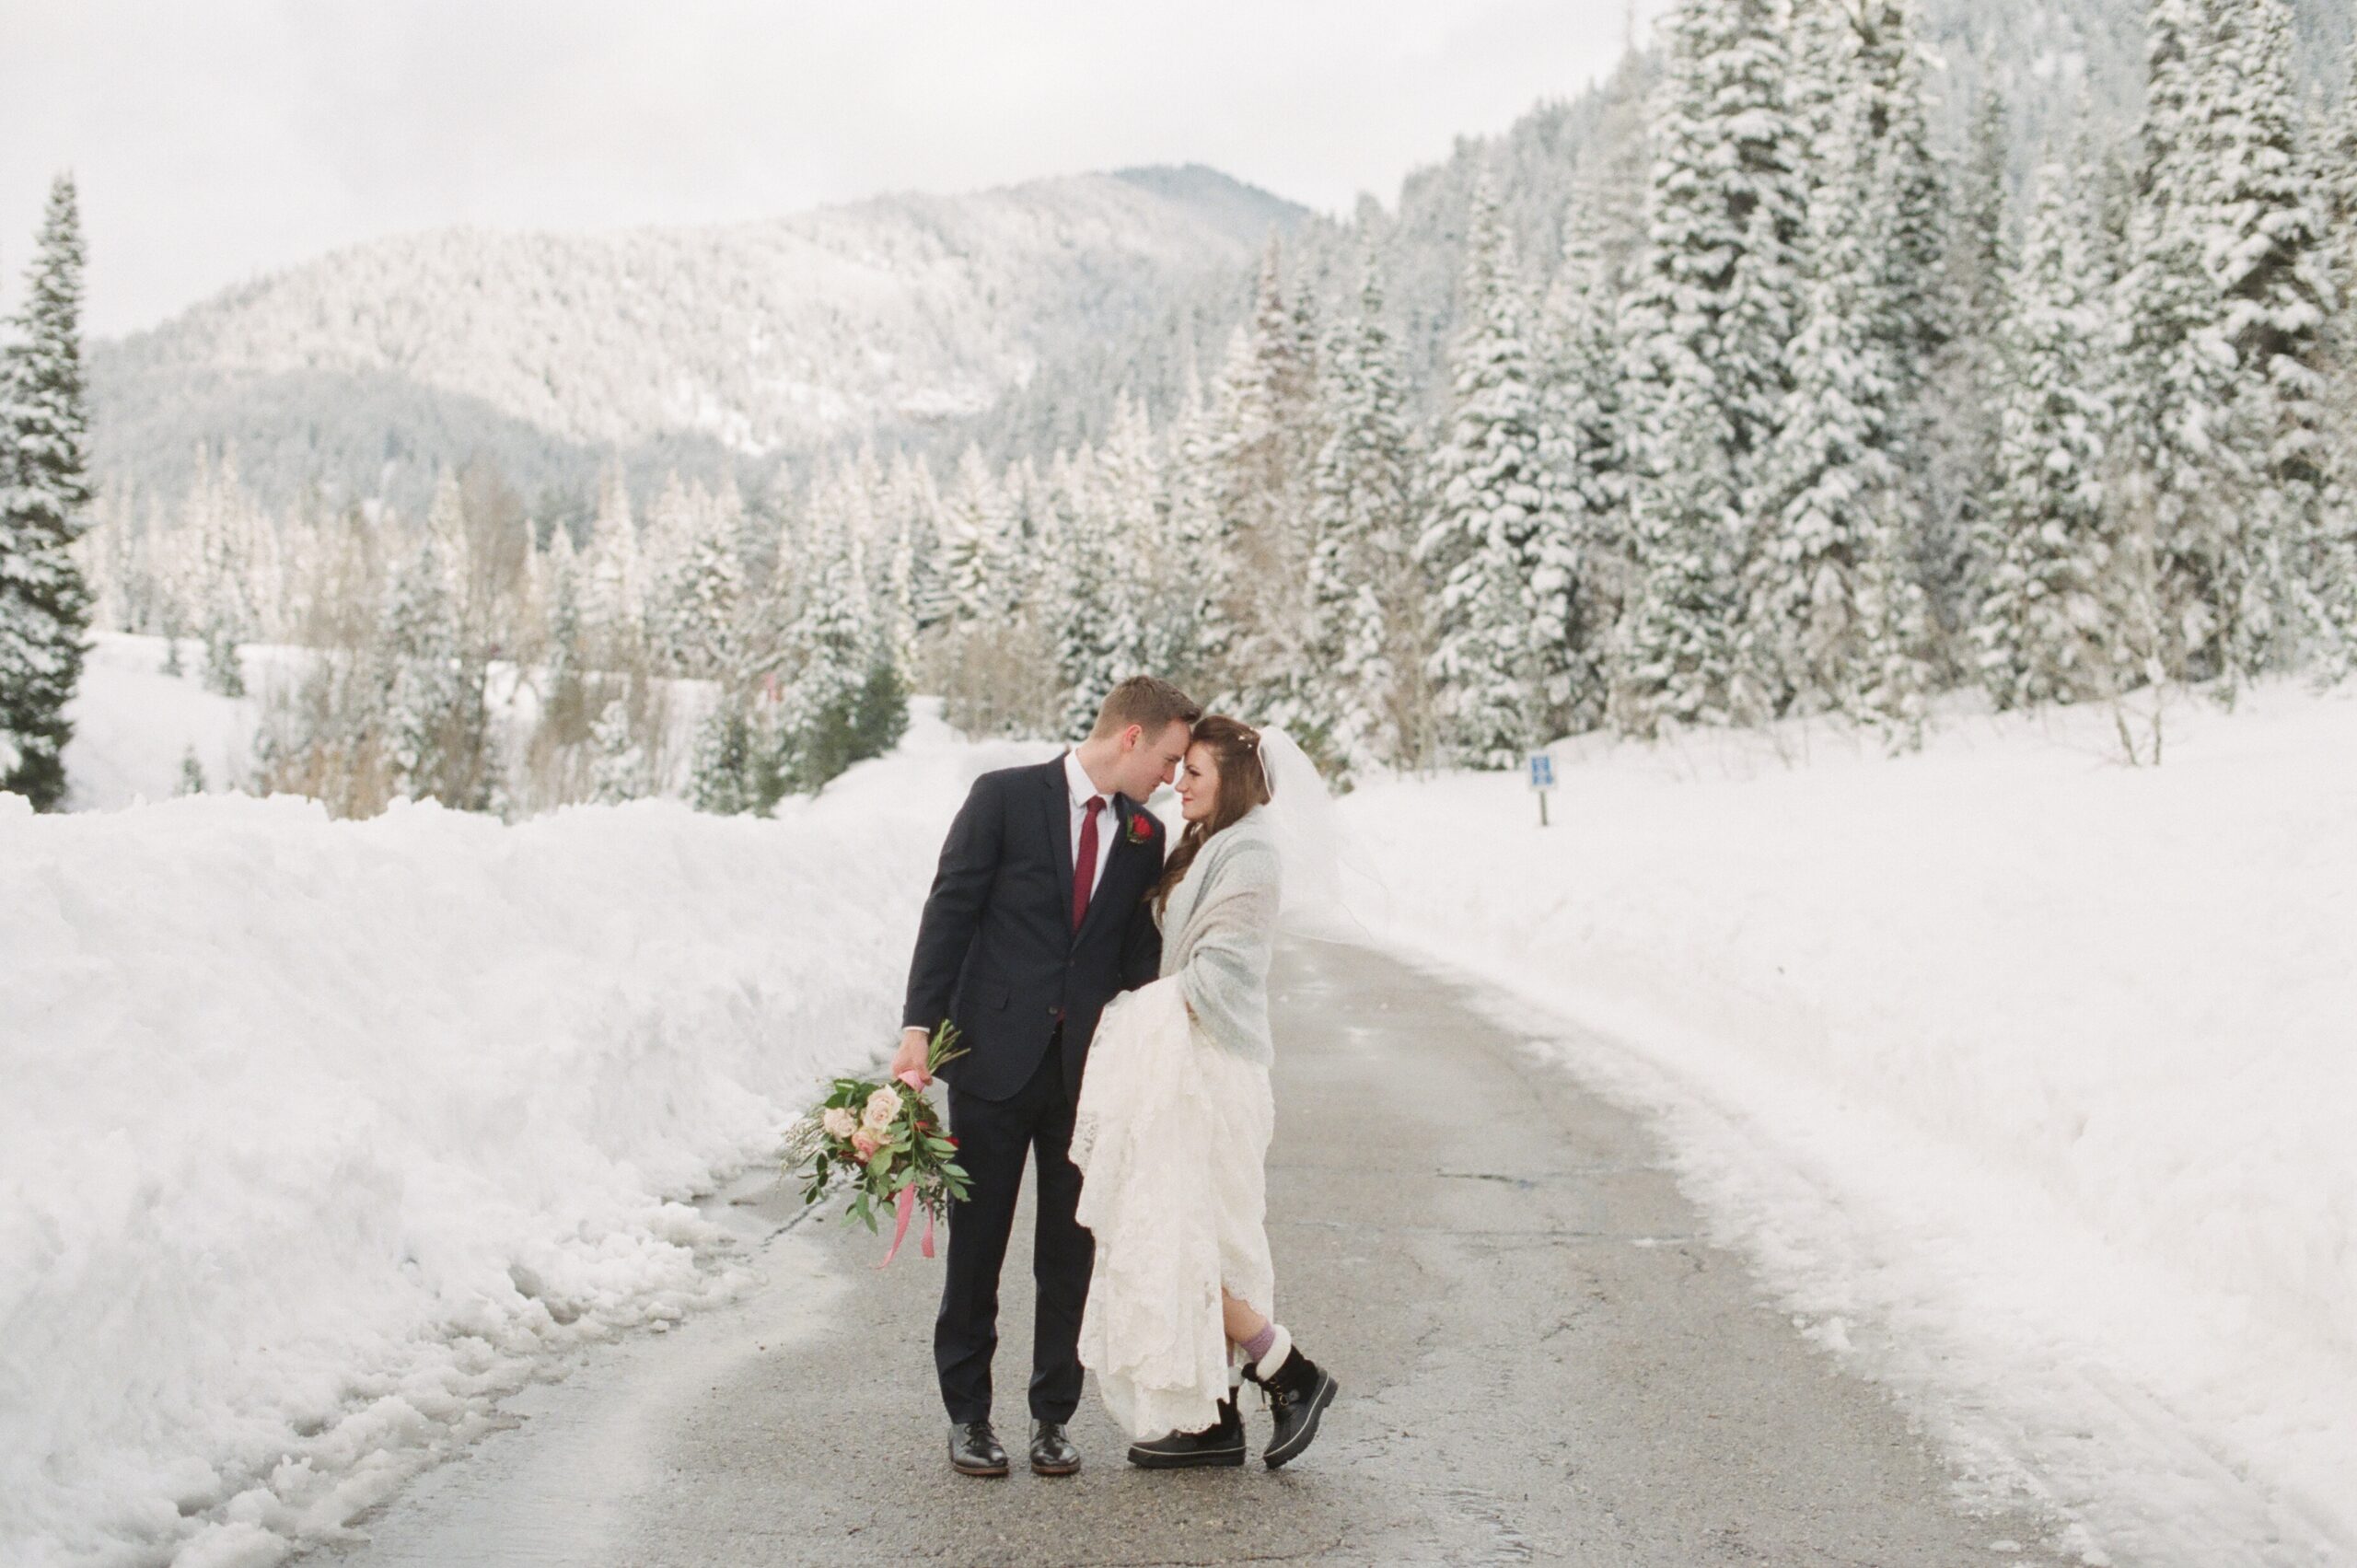 Utah winter photographer tips for bridals in the snow. Bride in shawl and snow boots